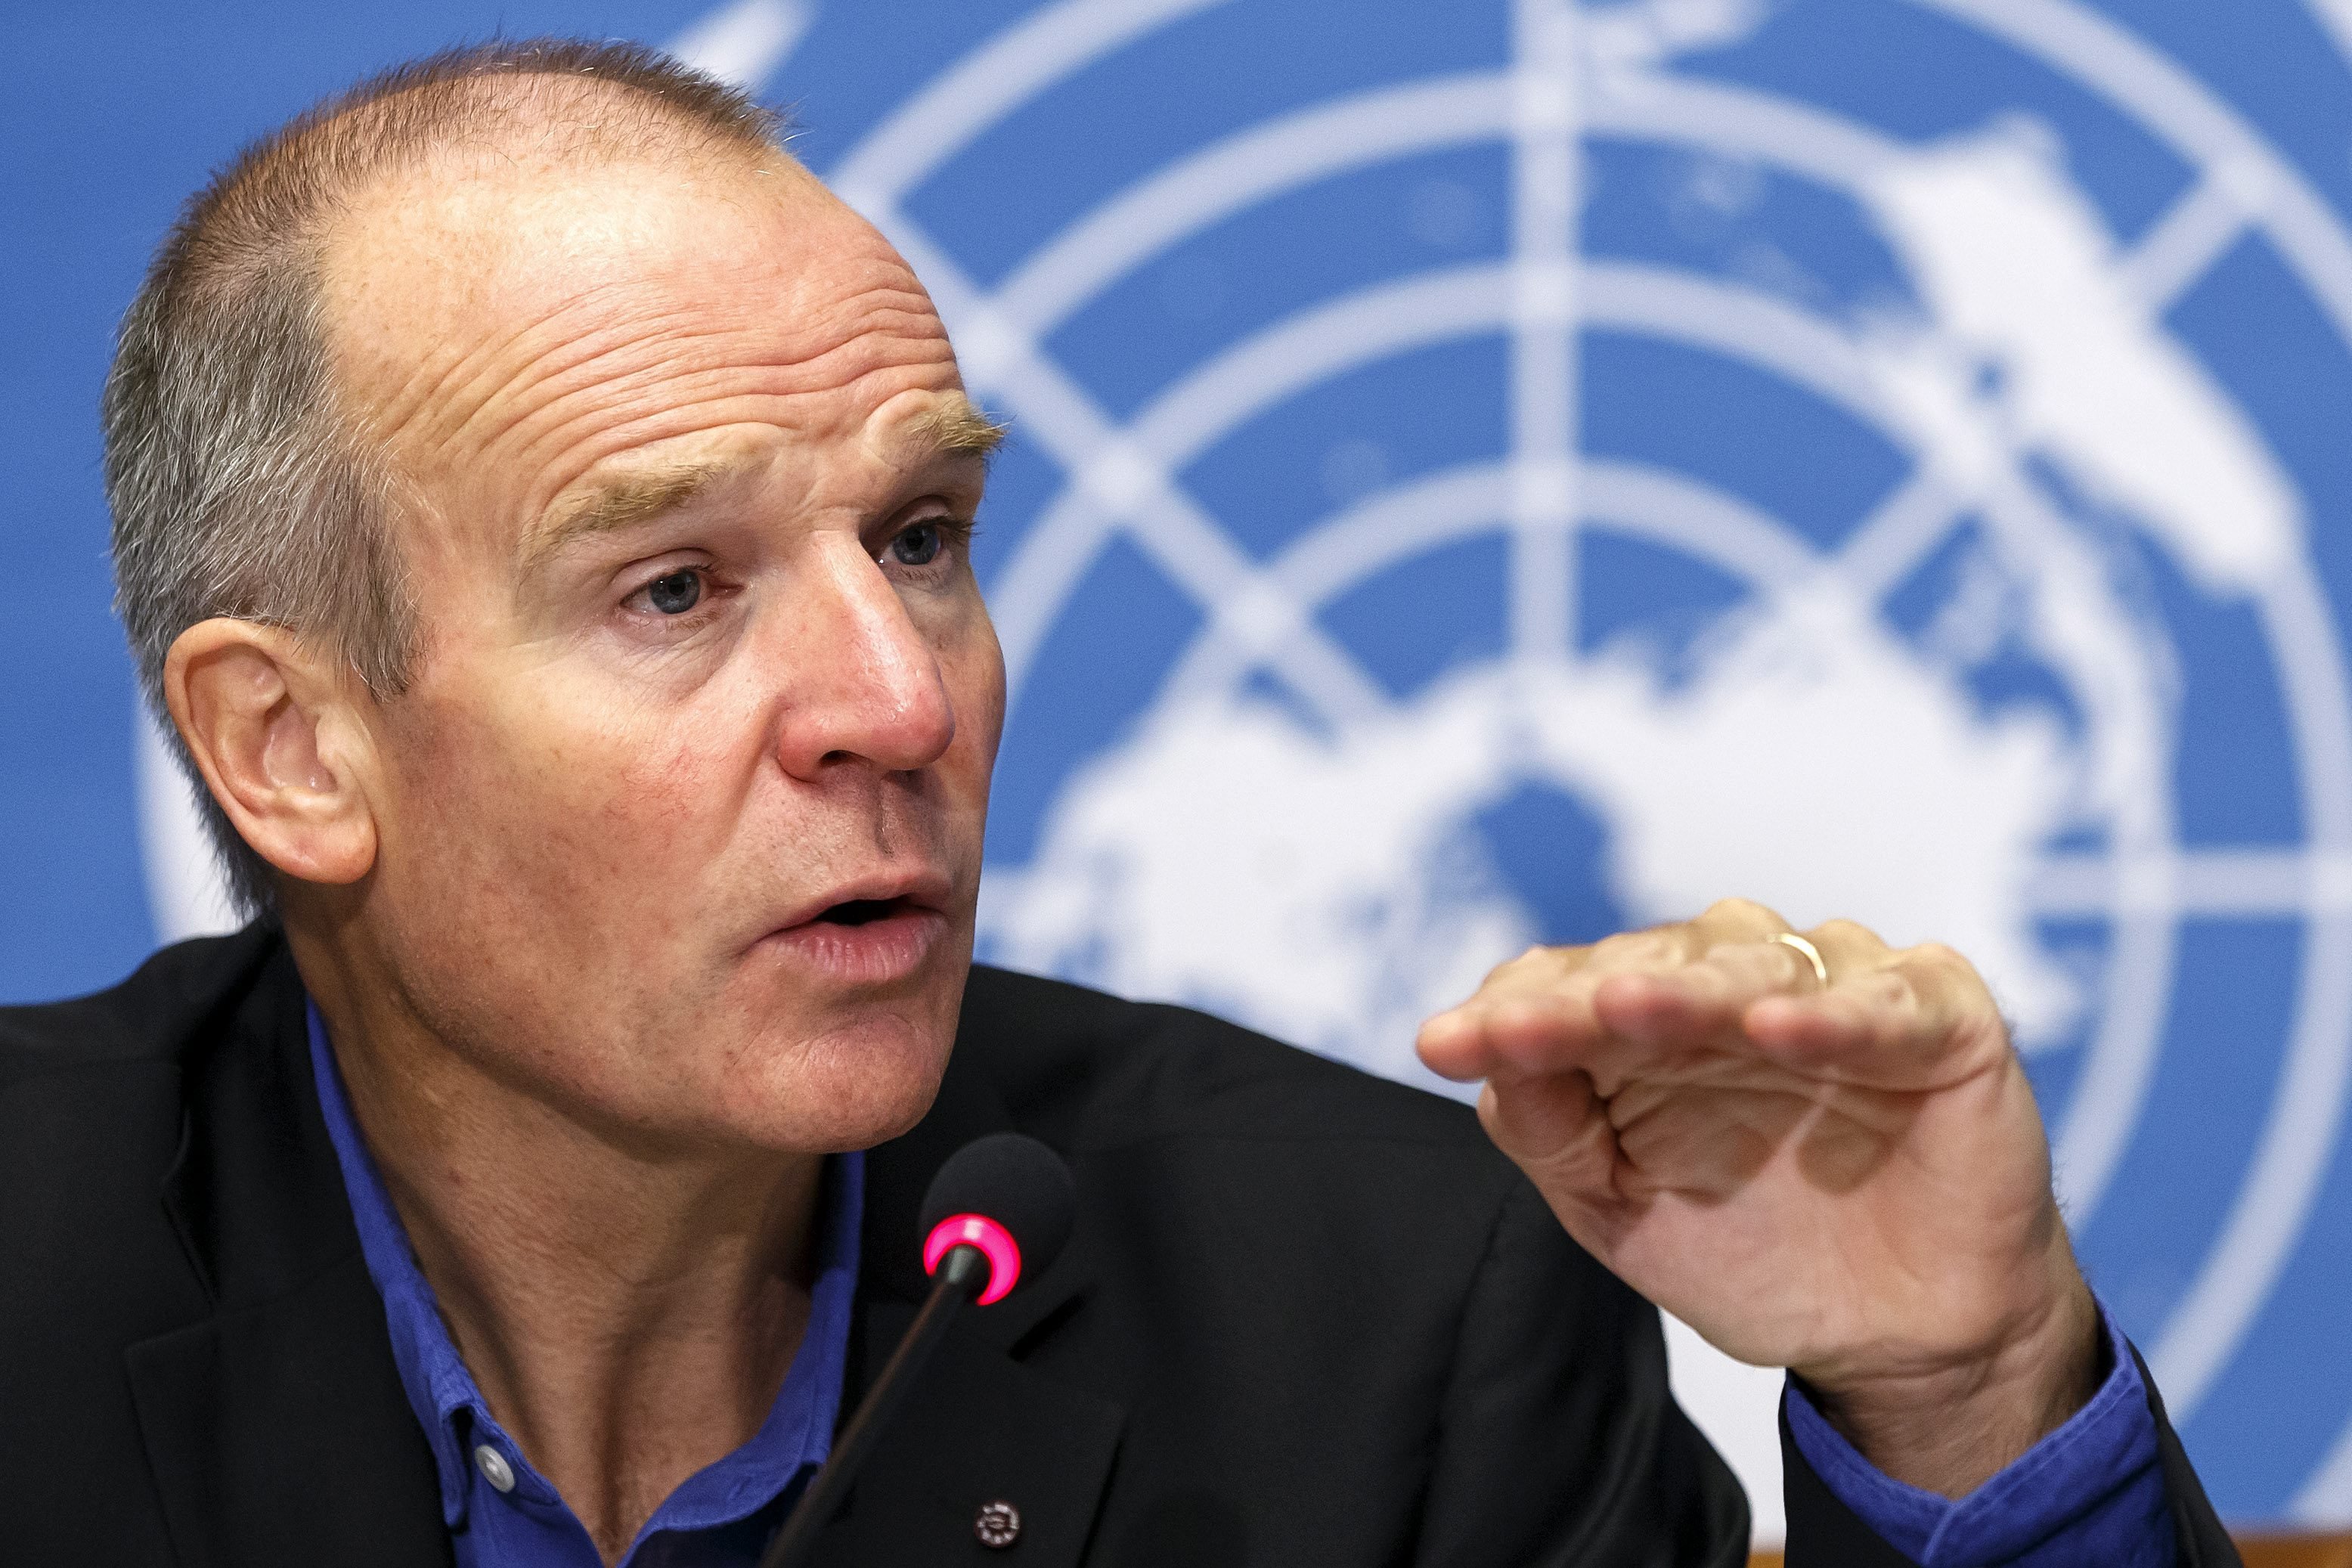 Christopher Dye, Director of Strategy of the World Health Organization speaks to the media about Ebola Virus Disease in West Africa, during a press conference, at the European headquarters of the United Nations in Geneva on Sept. 22, 2-14.  